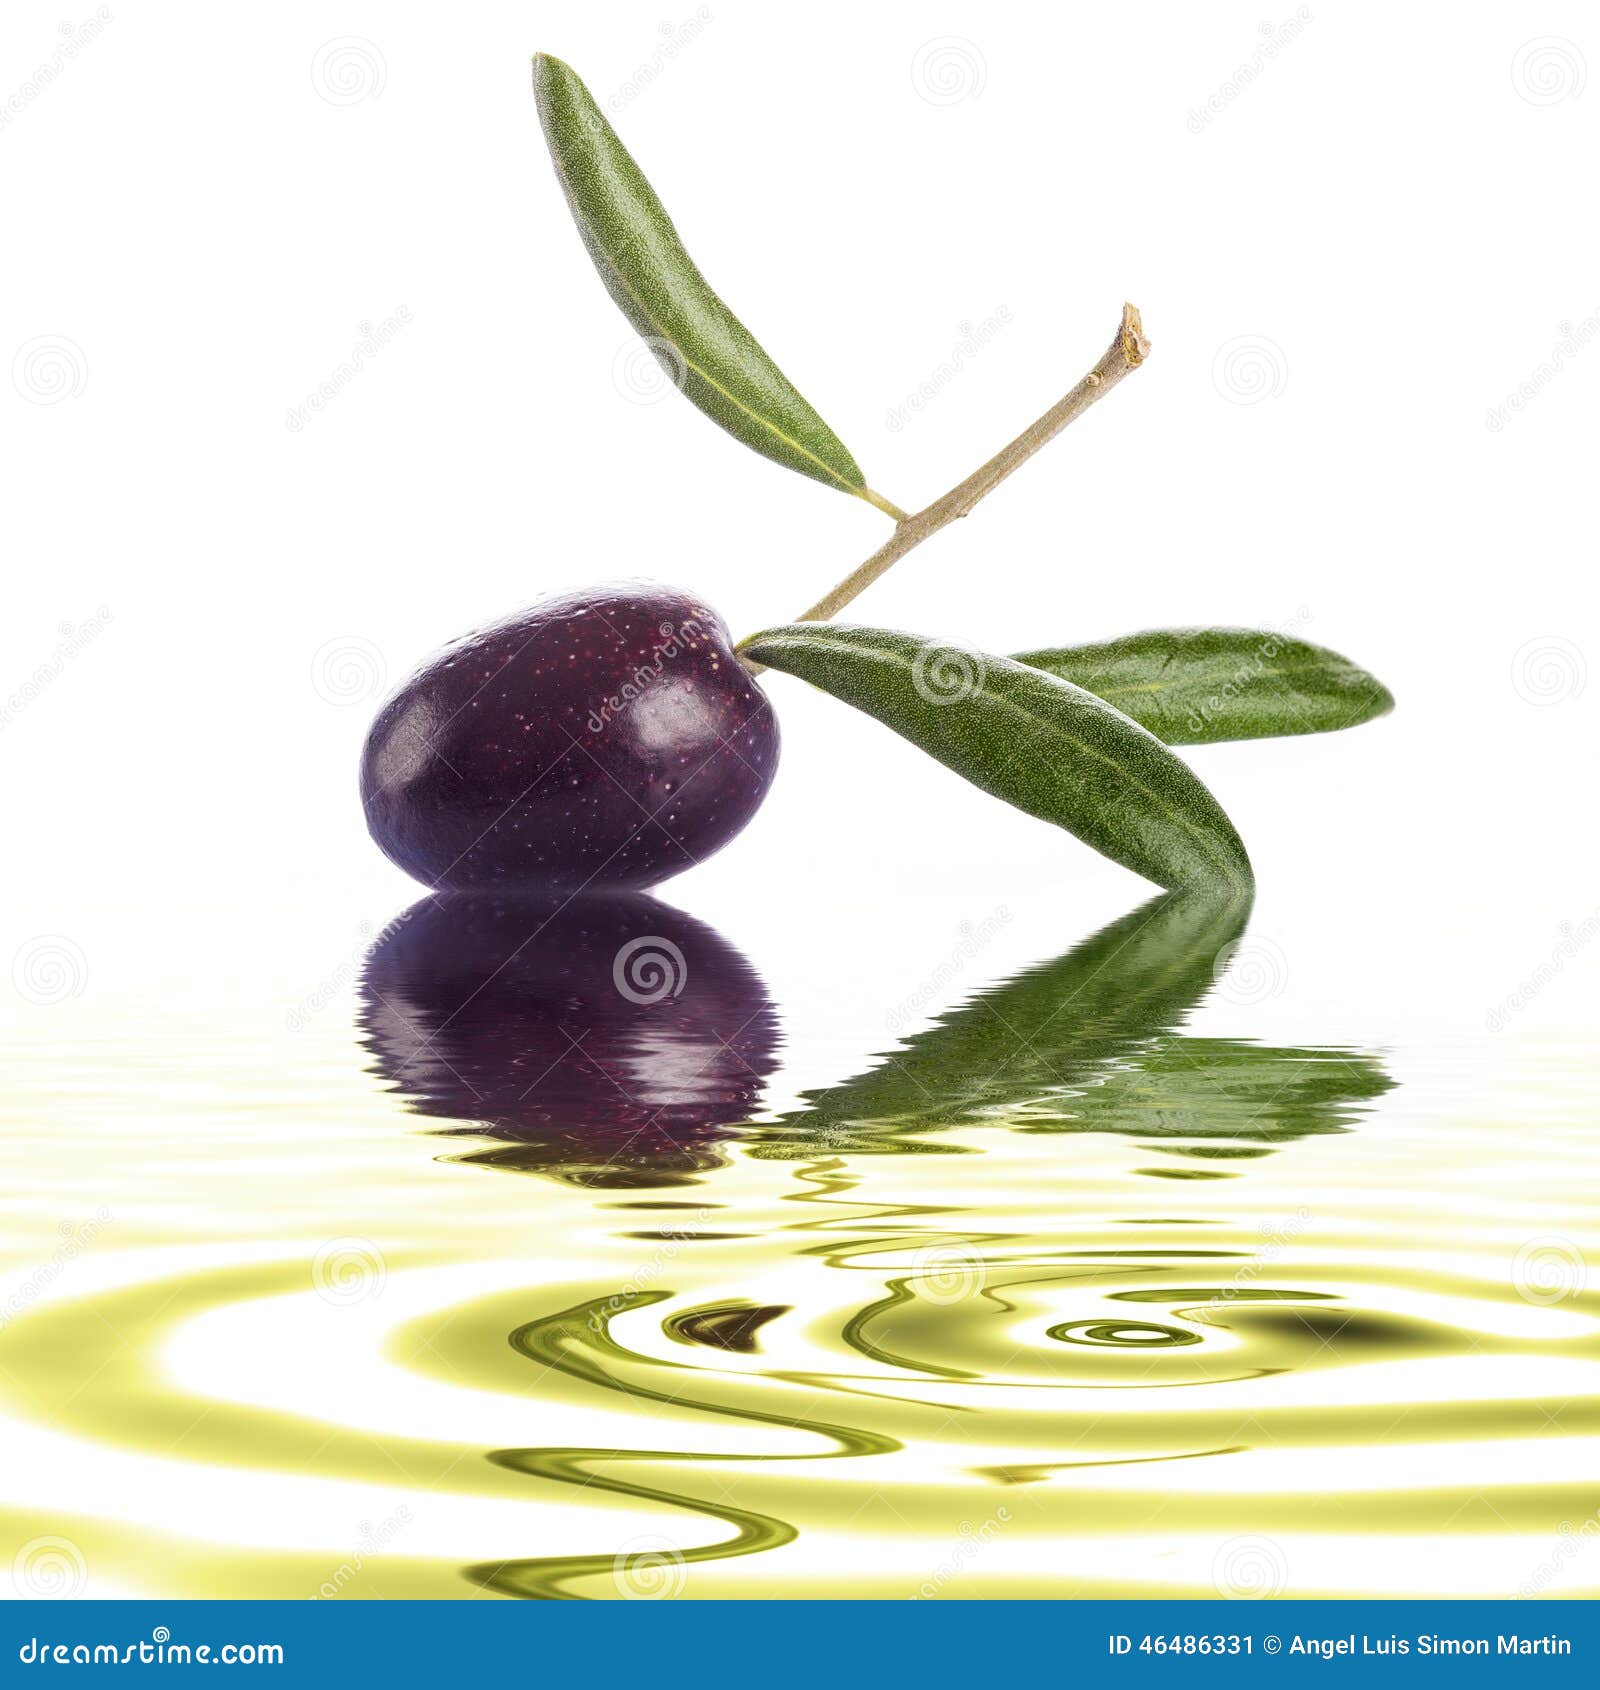 Premium Raw Olive on a White Background Stock Image - Image of green ...